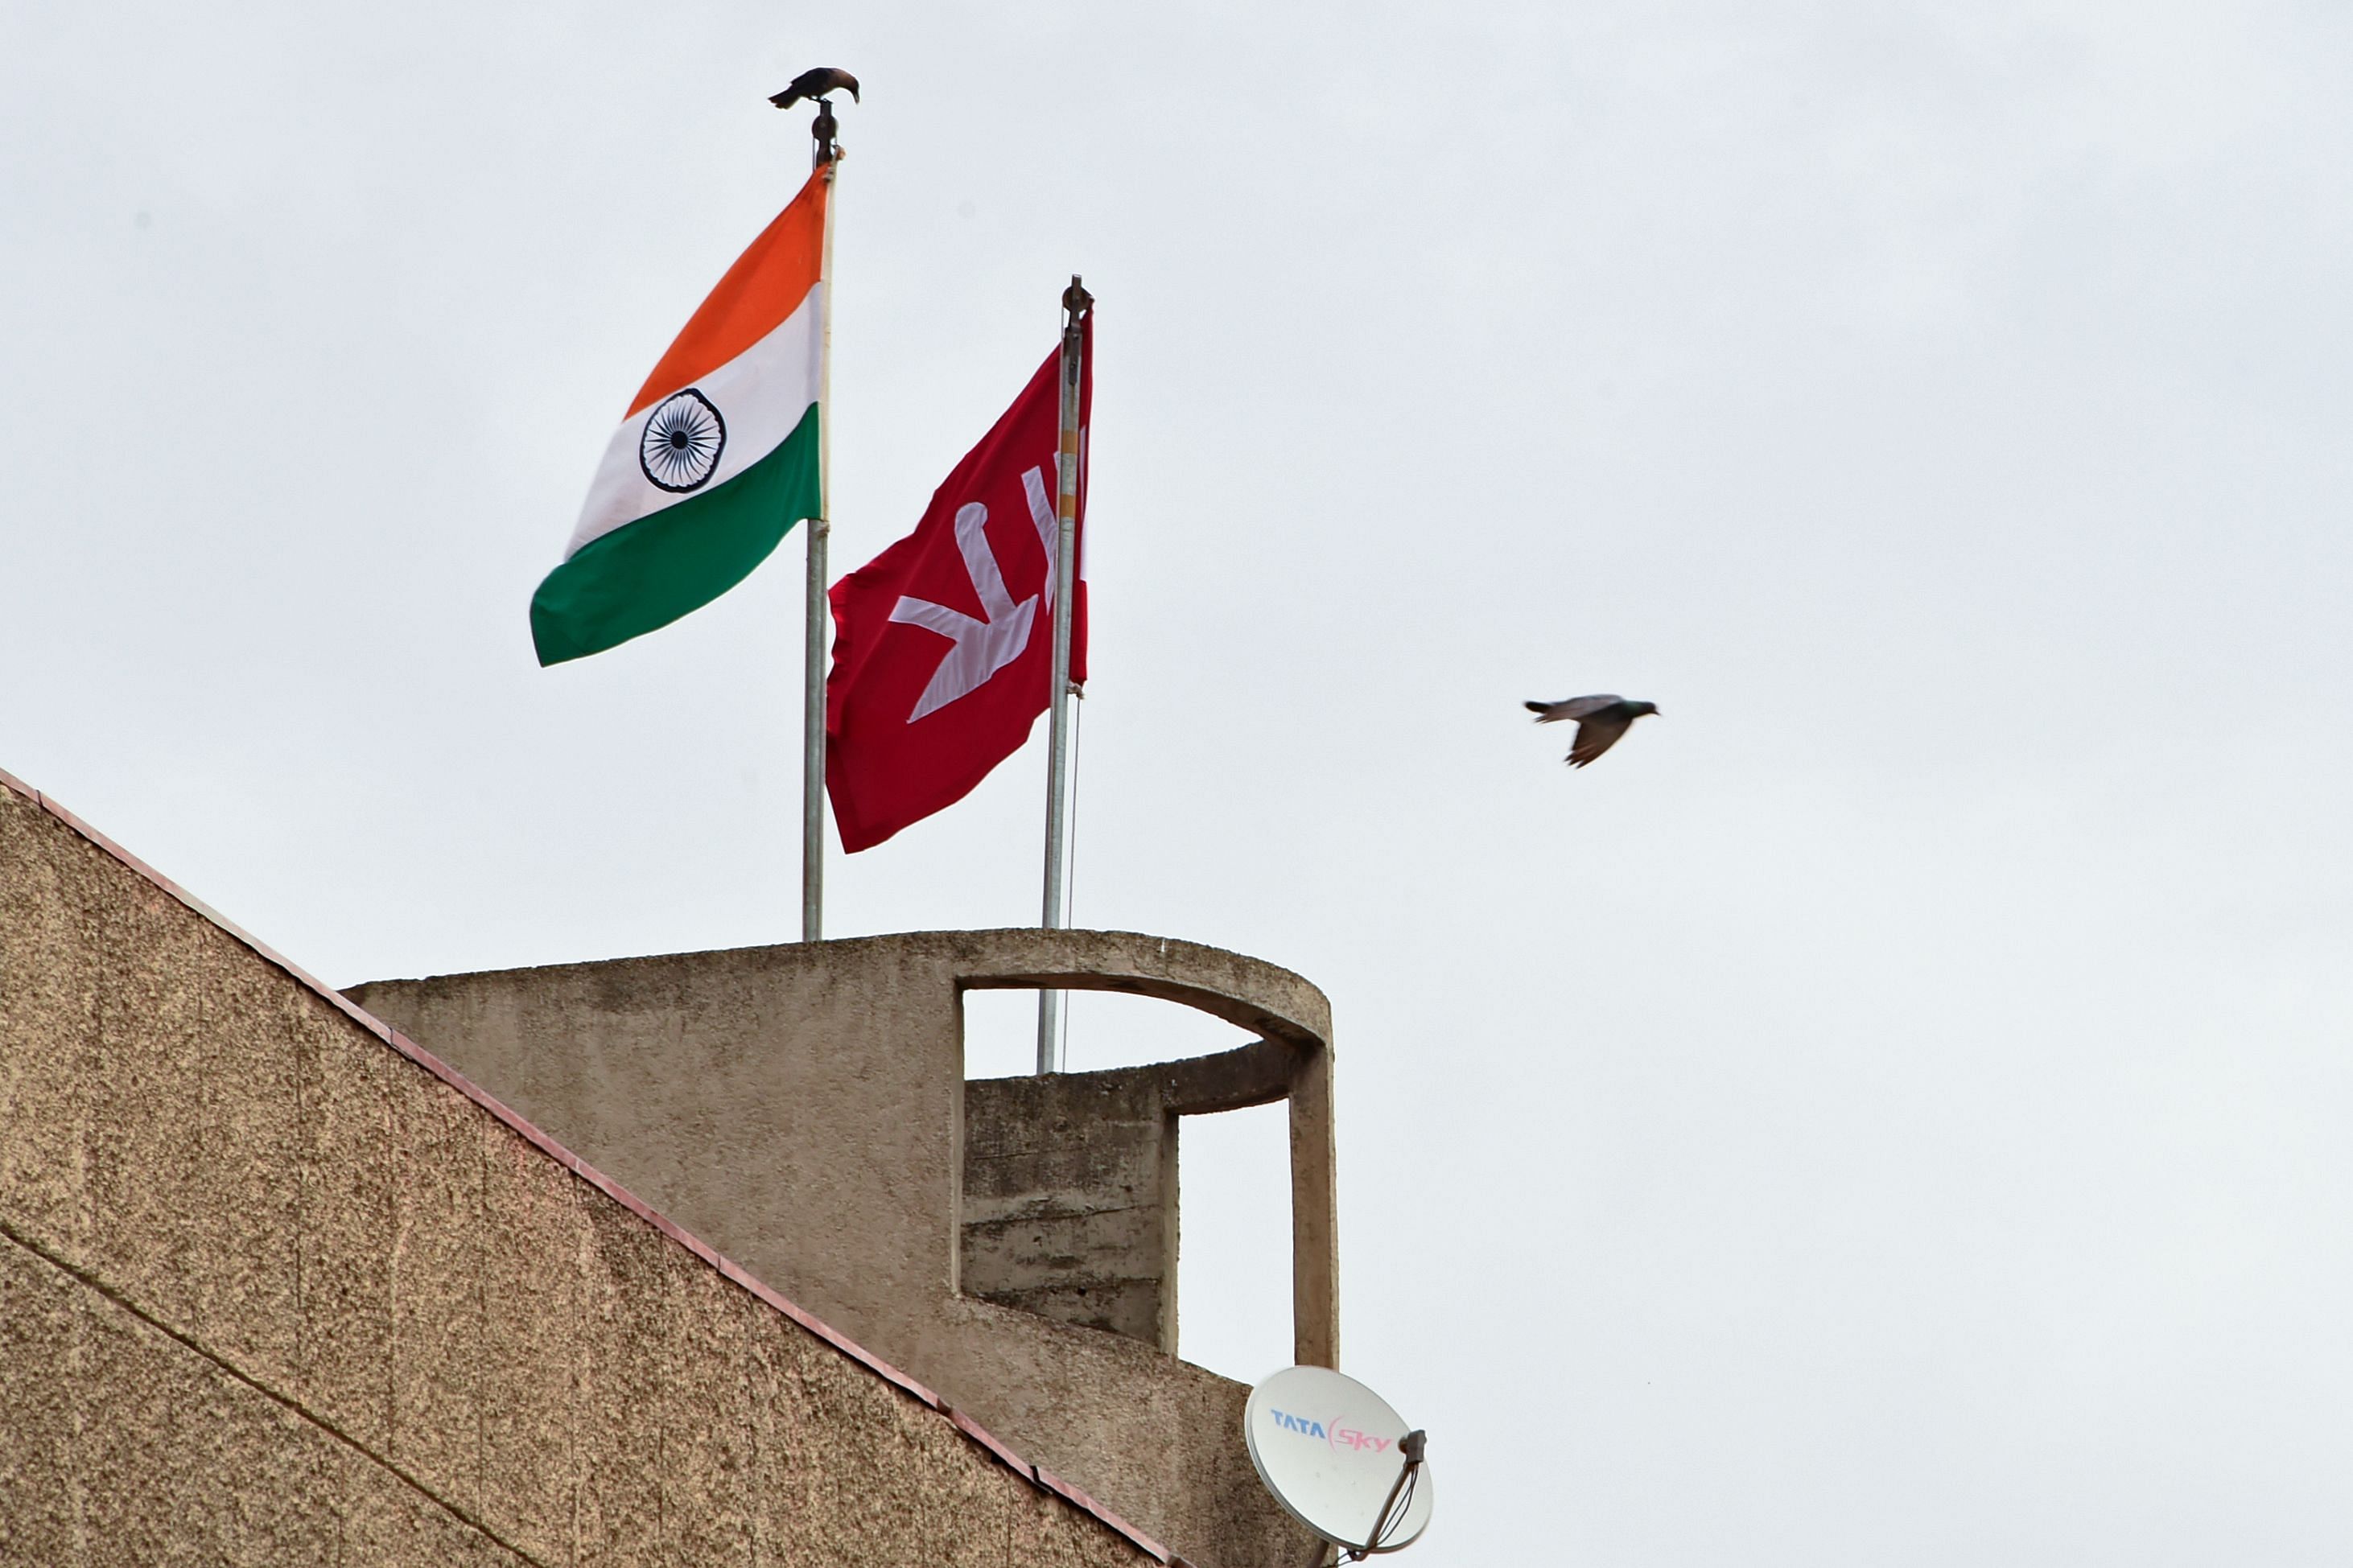 As the Centre revoked provisions of Article 370 that gave special status to Jammu and Kashmir, the official state flag will soon be permanently removed. (AFP Photo)